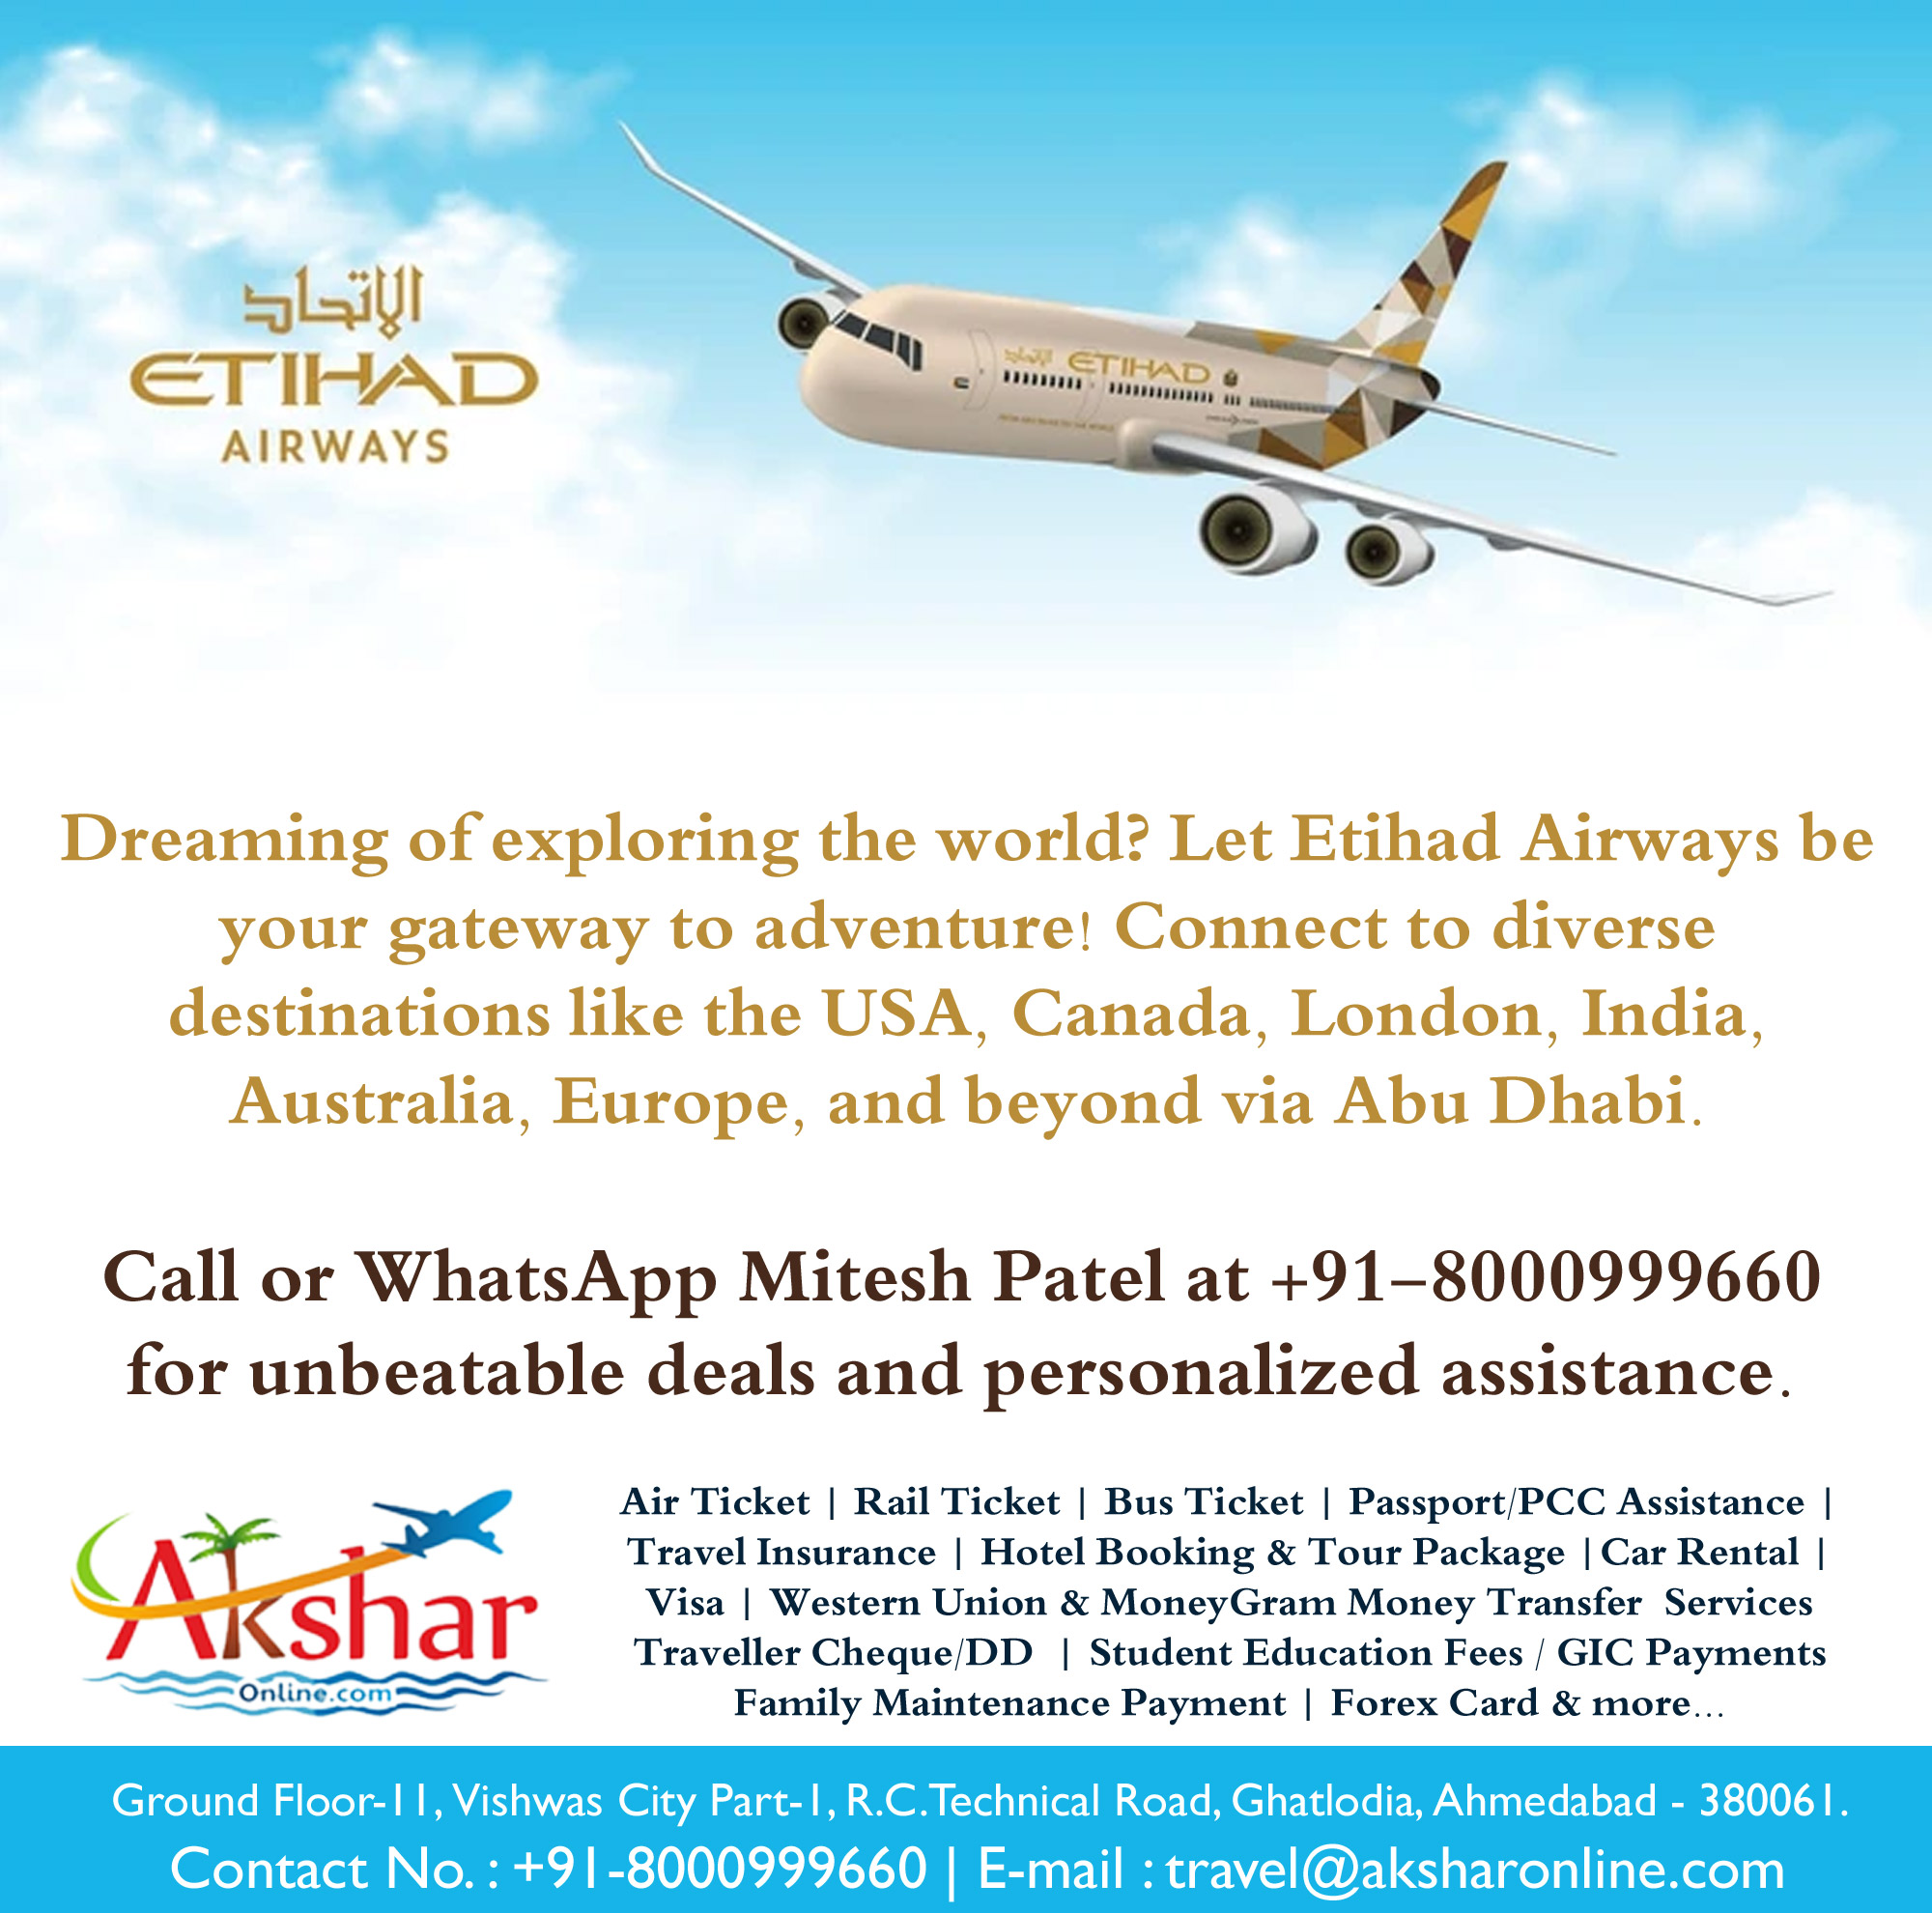 🌍✈️ Dreaming of exploring the world? Let Etihad Airways be your gateway to adventure! Connect to diverse destinations like the USA, Canada, London, India, Australia, Europe, and beyond via Abu Dhabi. 🎟️ Get the best rates on domestic and international airfare today! Whether you're planning a family vacation, a solo adventure, or a business trip, we've got you covered. 📞 Call or WhatsApp Mitesh Patel at +91-8000999660 for unbeatable deals and personalized assistance. Don't miss out on the latest updates and exclusive offers! Follow us on Facebook at facebook.com/aksharonline for more travel inspiration and tips. Your next journey starts with us. Fly with Etihad Airways and unlock a world of possibilities! ✈️🌏 #etihadairways #travelwithaksharonline #exploretheworld #TravelGoals #traveldeals #usatoindia #indiaairfare #americatoindiaairfare #americaflight #usaflightfare #usaairfare #canadaairfare #usafly #indiafly #mumbaifly #canadaflight #CaNadaFly #aksharonline #flighttocanada #winnipeg #toronto#cheapflightstoindia2024 #canadatoindiaflightdeals #budgettravelindia #FlyAffordableToIndia #AprilMayFlightSpecials #DiscountedTicketsToIndia #FlySmartToIndia #affordableairfarecanadaindia #spring2024flightdeals #flyusatoindiabudget2024 #flyusatoindia #indiaboundonabudget #cheapflighttoindia2024 #aprilmaytraveldeals #canadatoindiaairfarediscounts #budgettravelindia2024 #CheapTicketsToIndia #flightdeals, Air Ticket | Rail Ticket | Bus Ticket | Passport/PCC Assistance | Travel Insurance | Hotel Booking & Tour Package |Car Rental | Visa | Western Union & MoneyGram Money Transfer  Services Traveller Cheque/DD  | Student Education Fees / GIC Payments Family Maintenance Payment | Forex Card & more...,  aksharonline.com, +91-8000999660,